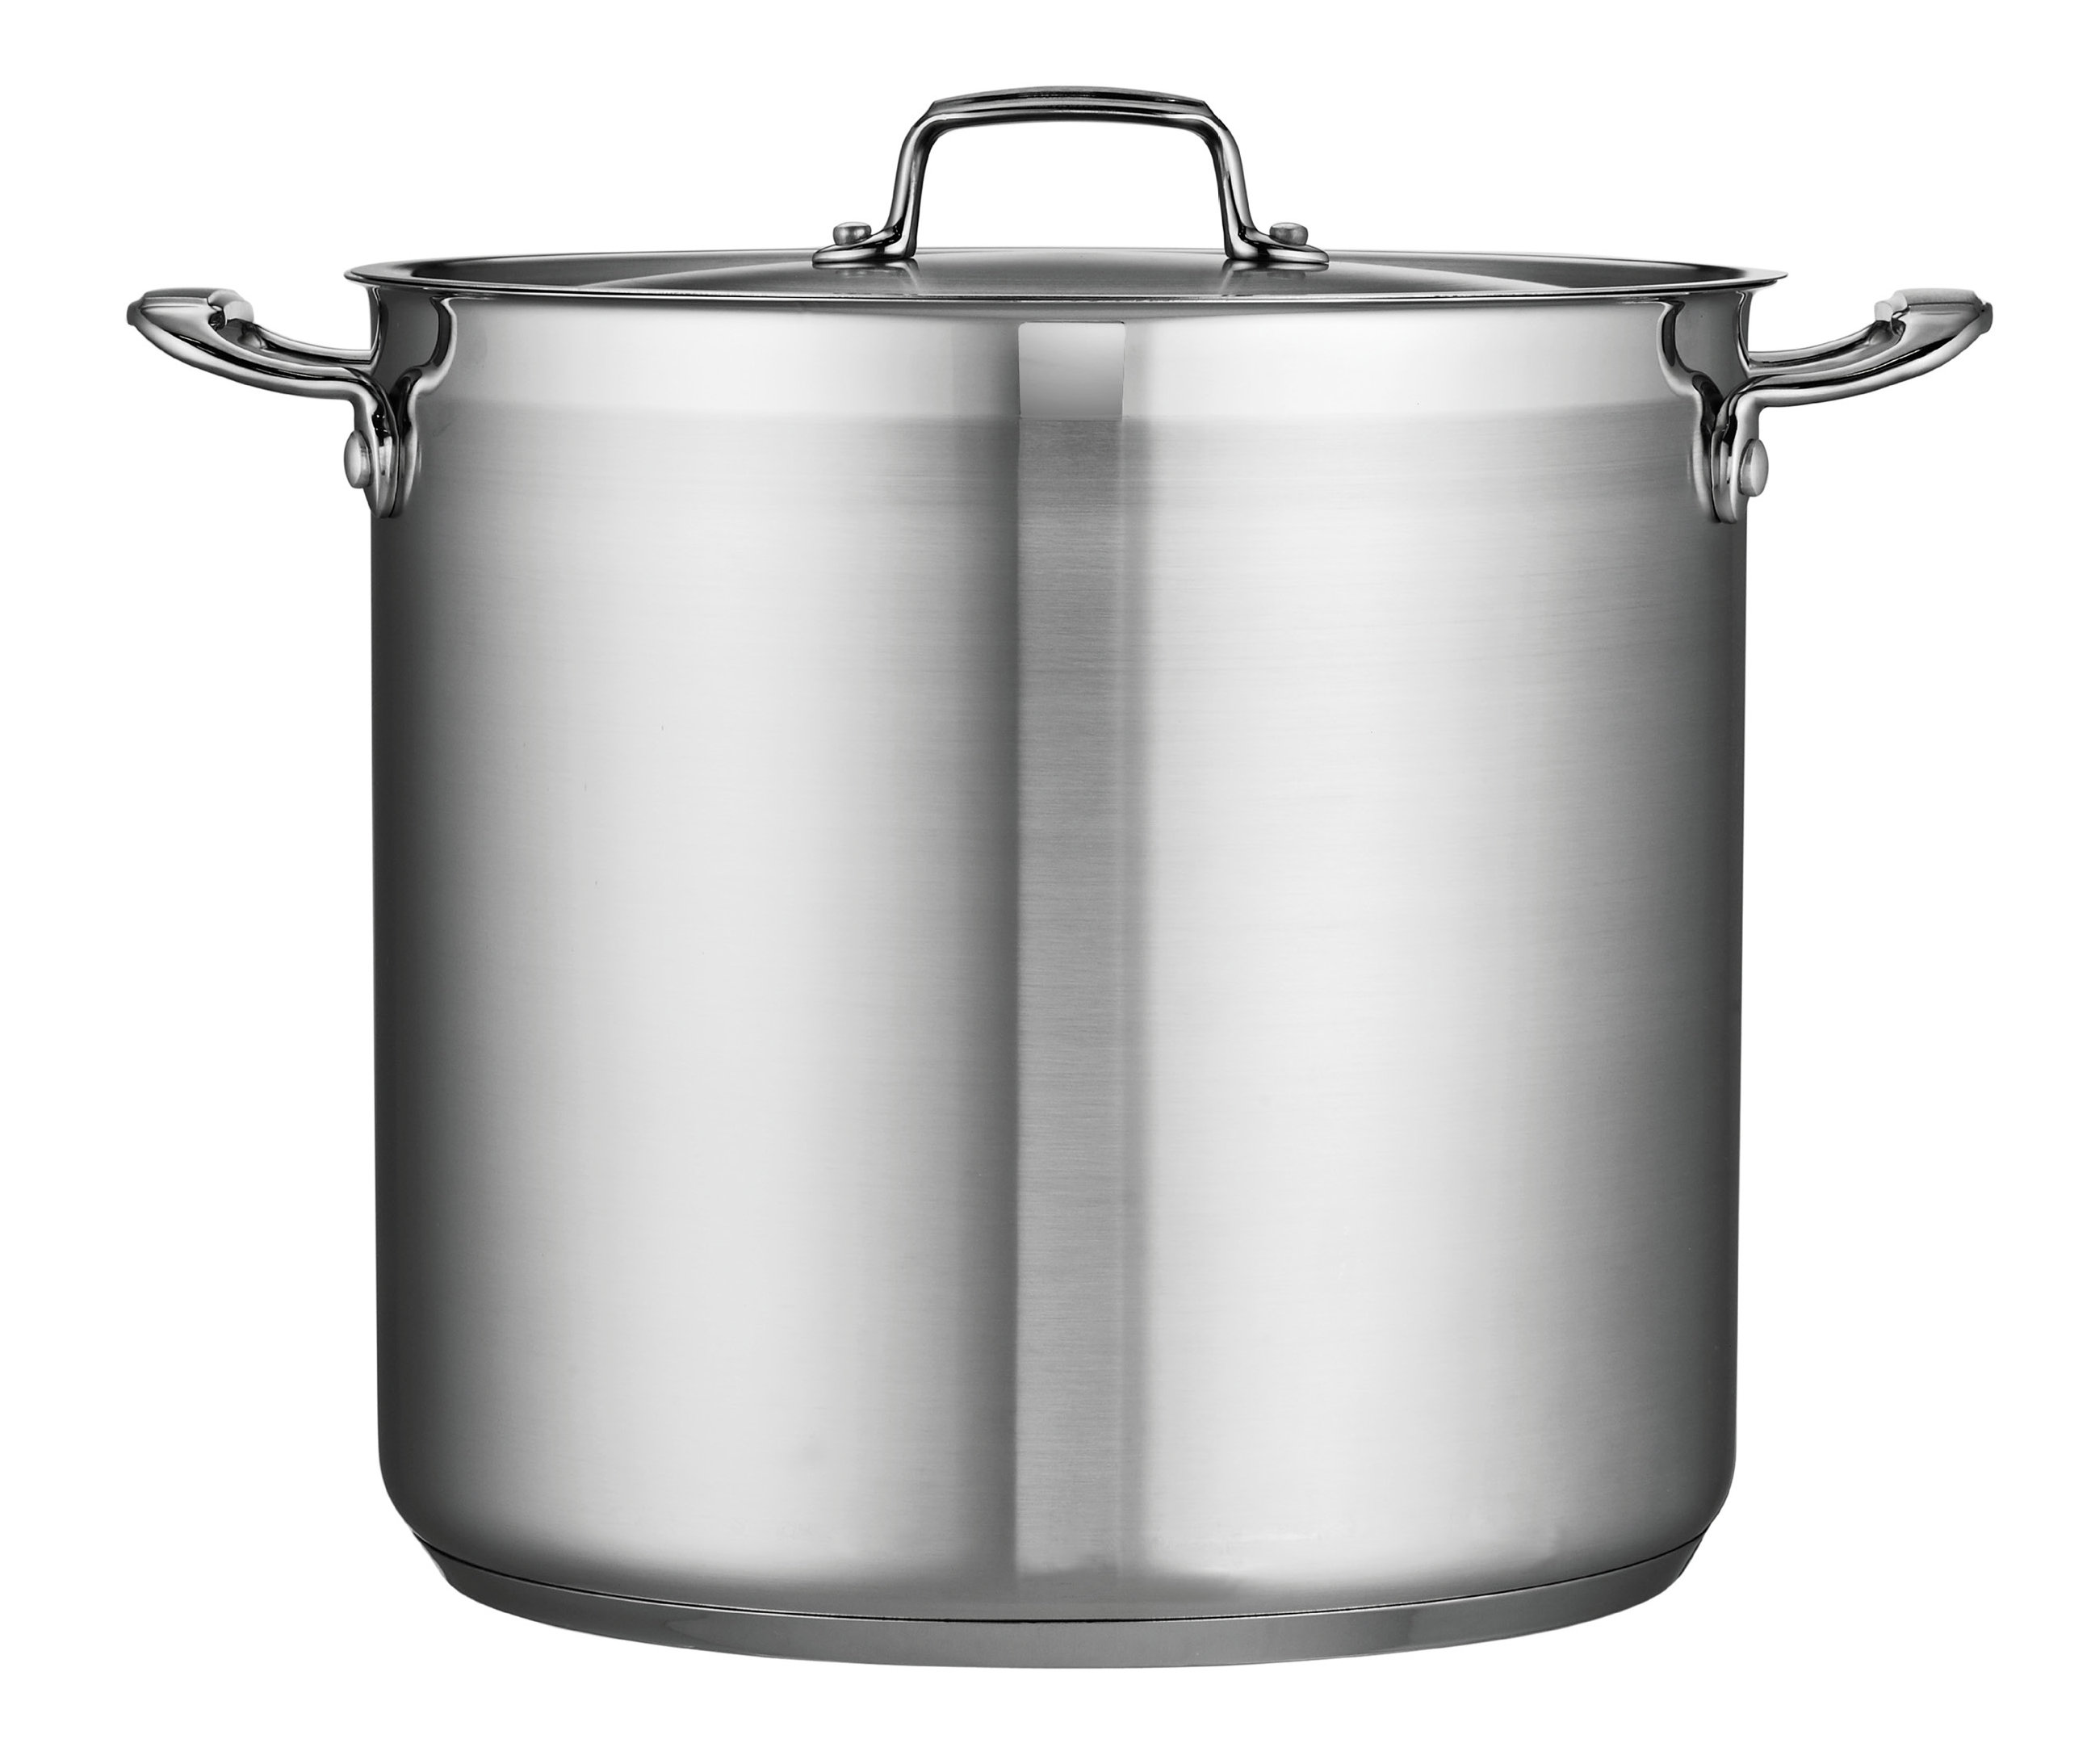 Tramontina 22 qt. Stainless Steel Canning Stock Pot with Rack